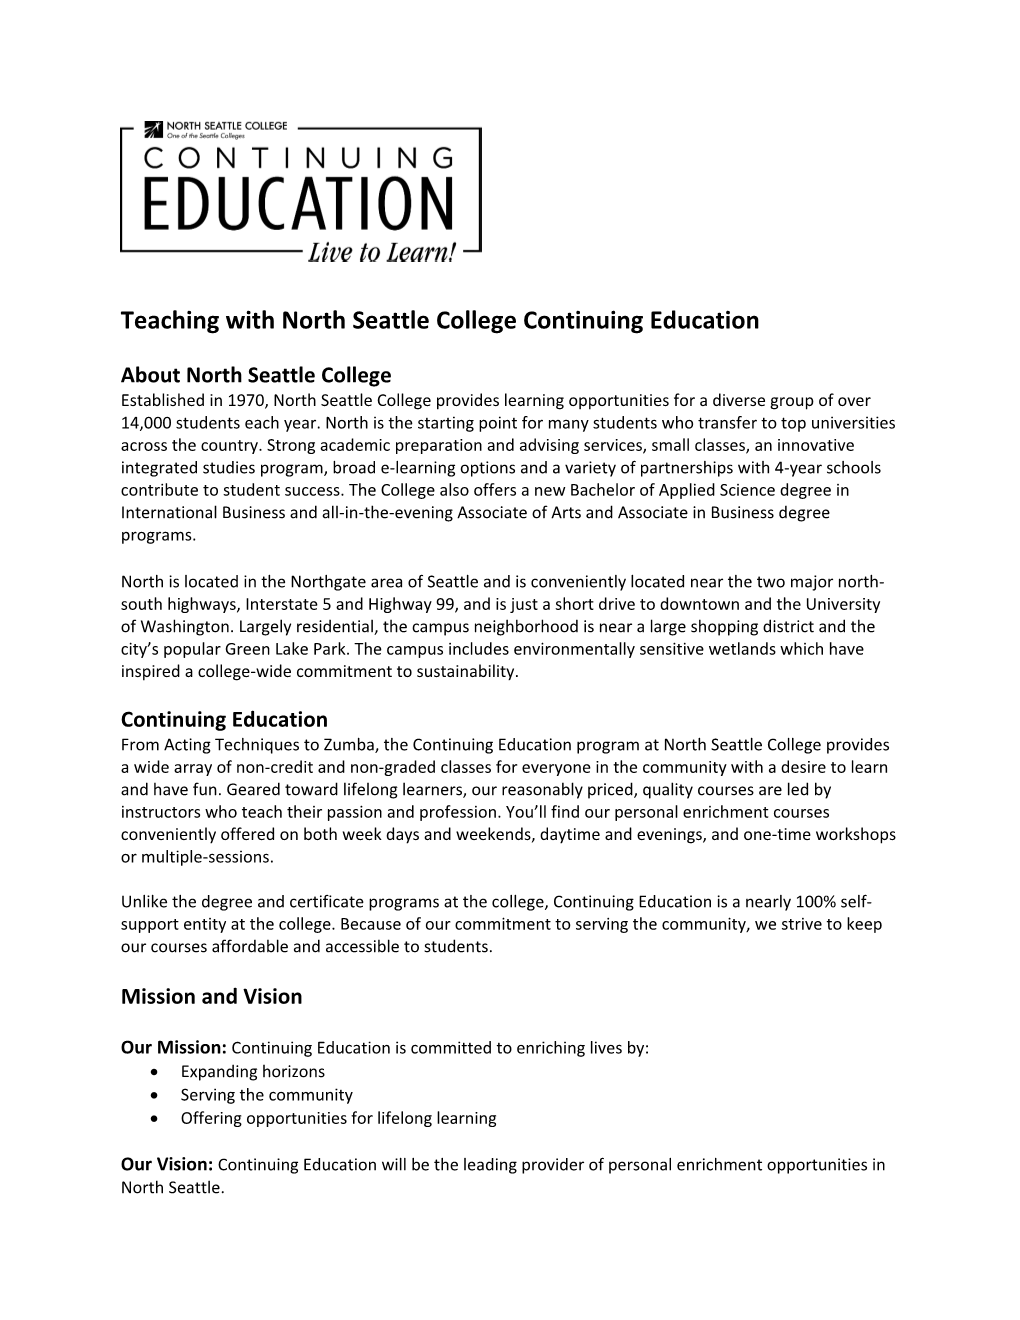 Teaching with North Seattle College Continuing Education